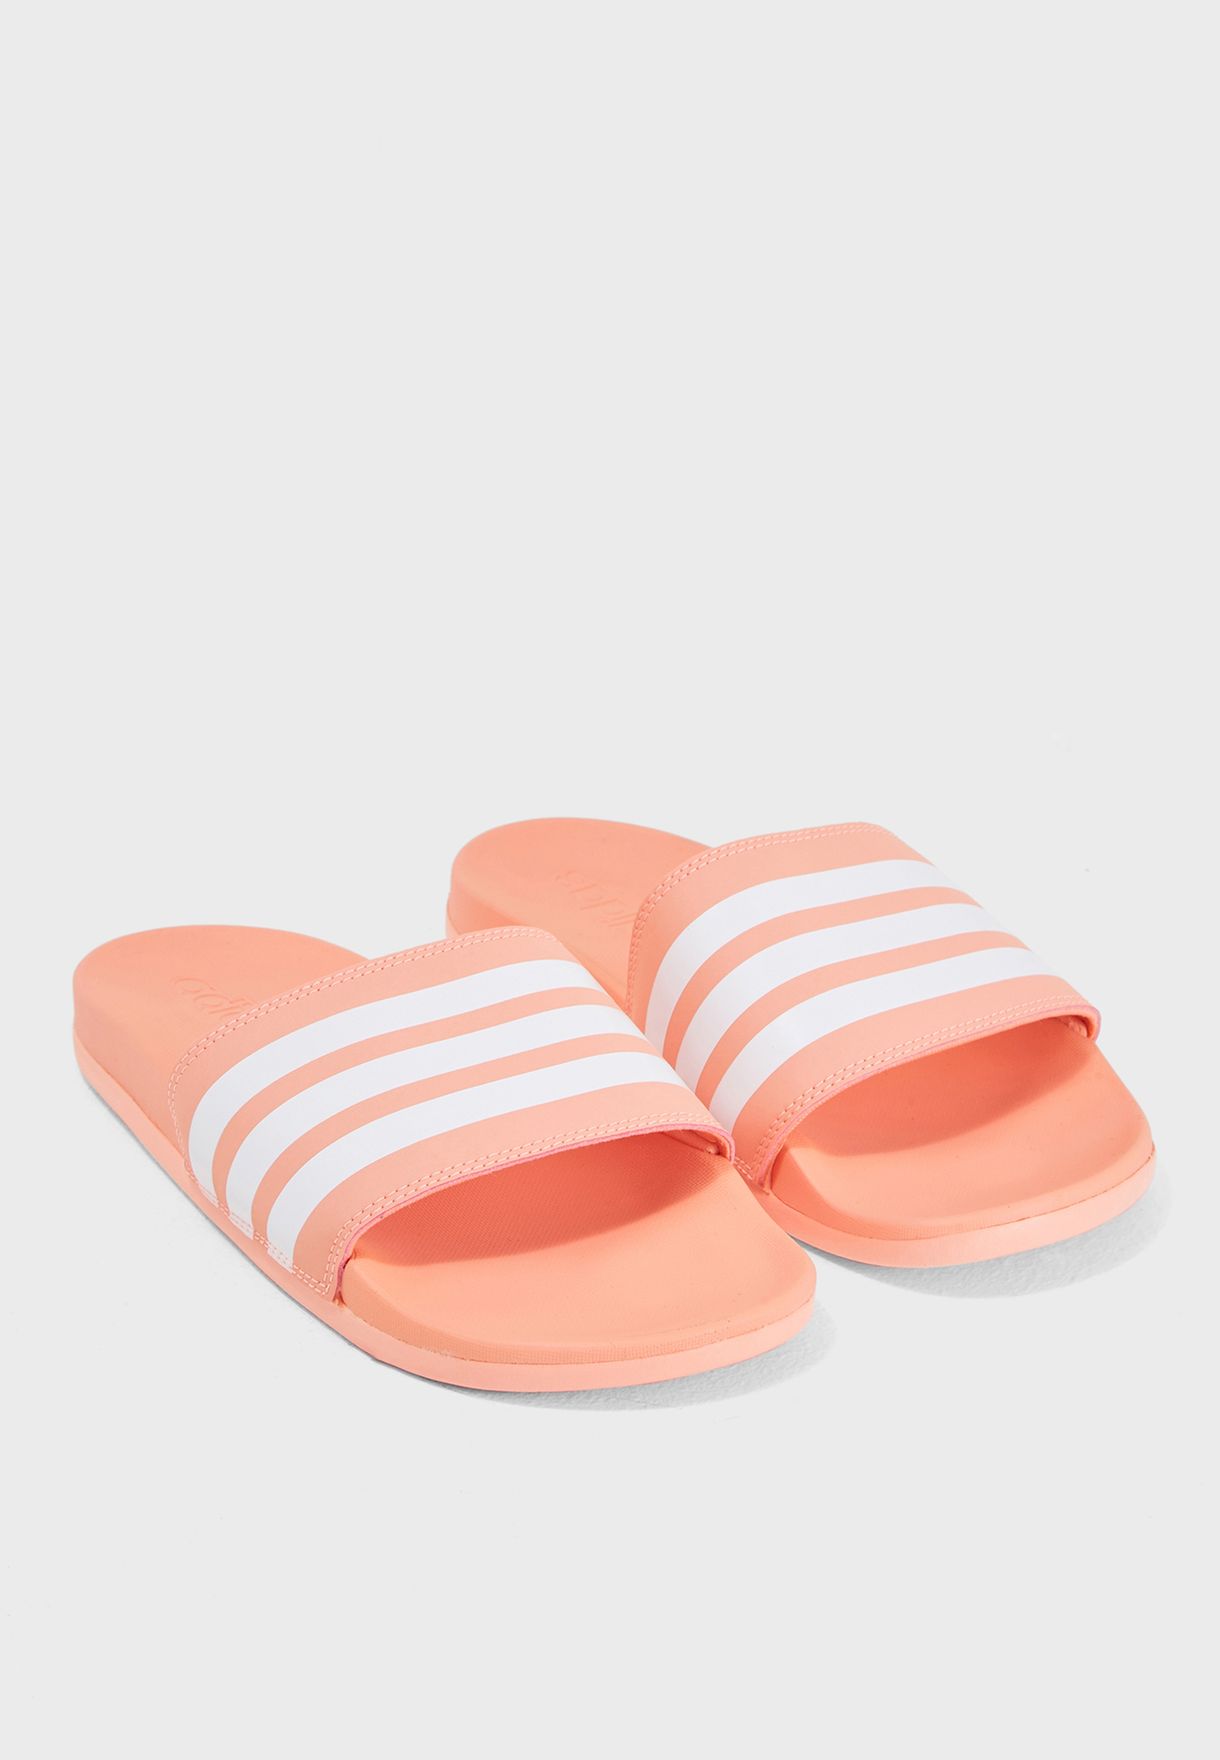 Adidas Adilette Comfort Pink Online Shop, UP TO 55% OFF